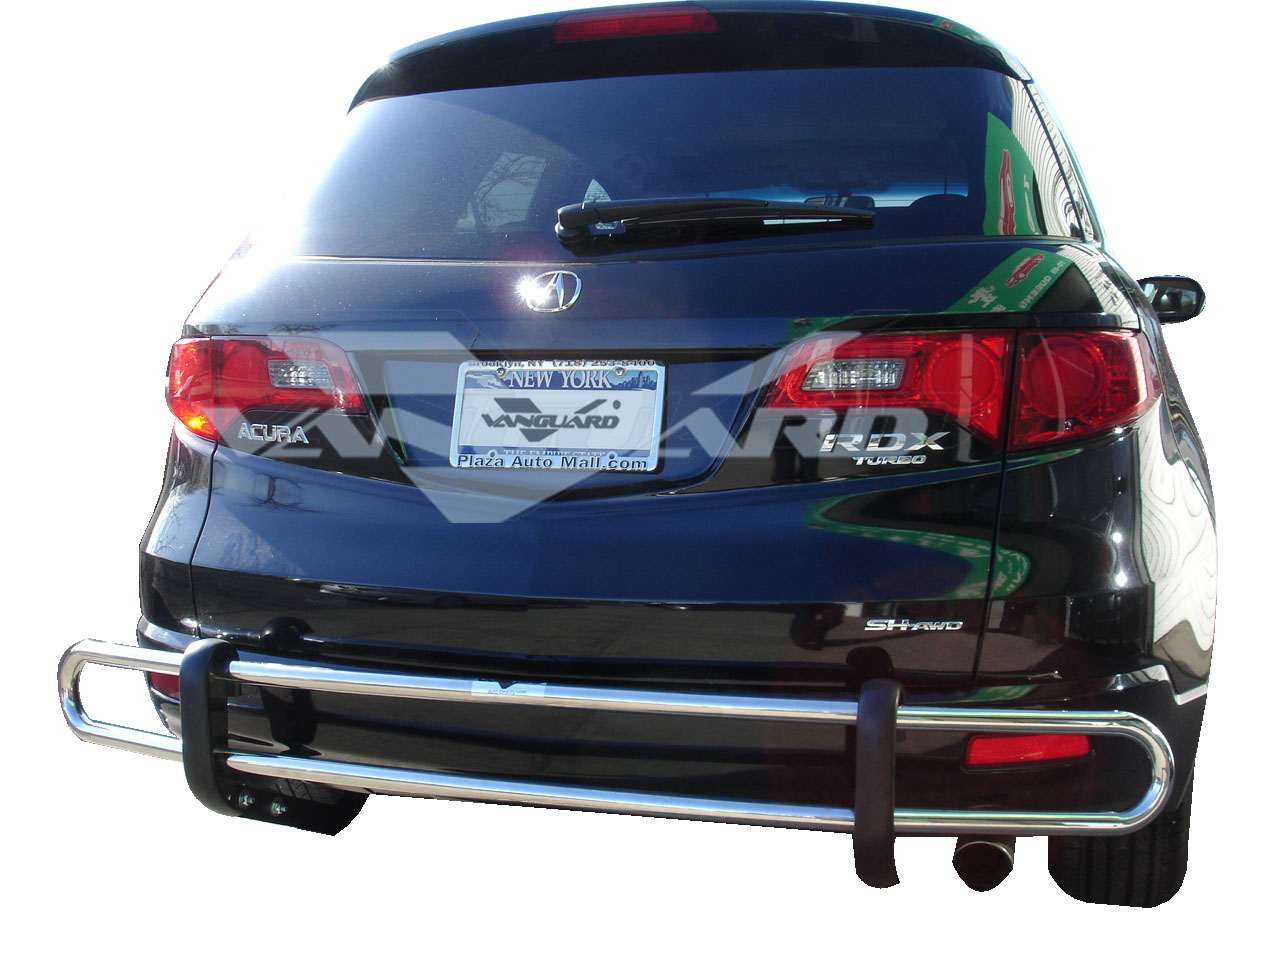 VGRBG-0712-0237SS Stainless Steel Double Tube Style Rear Bumper Guard